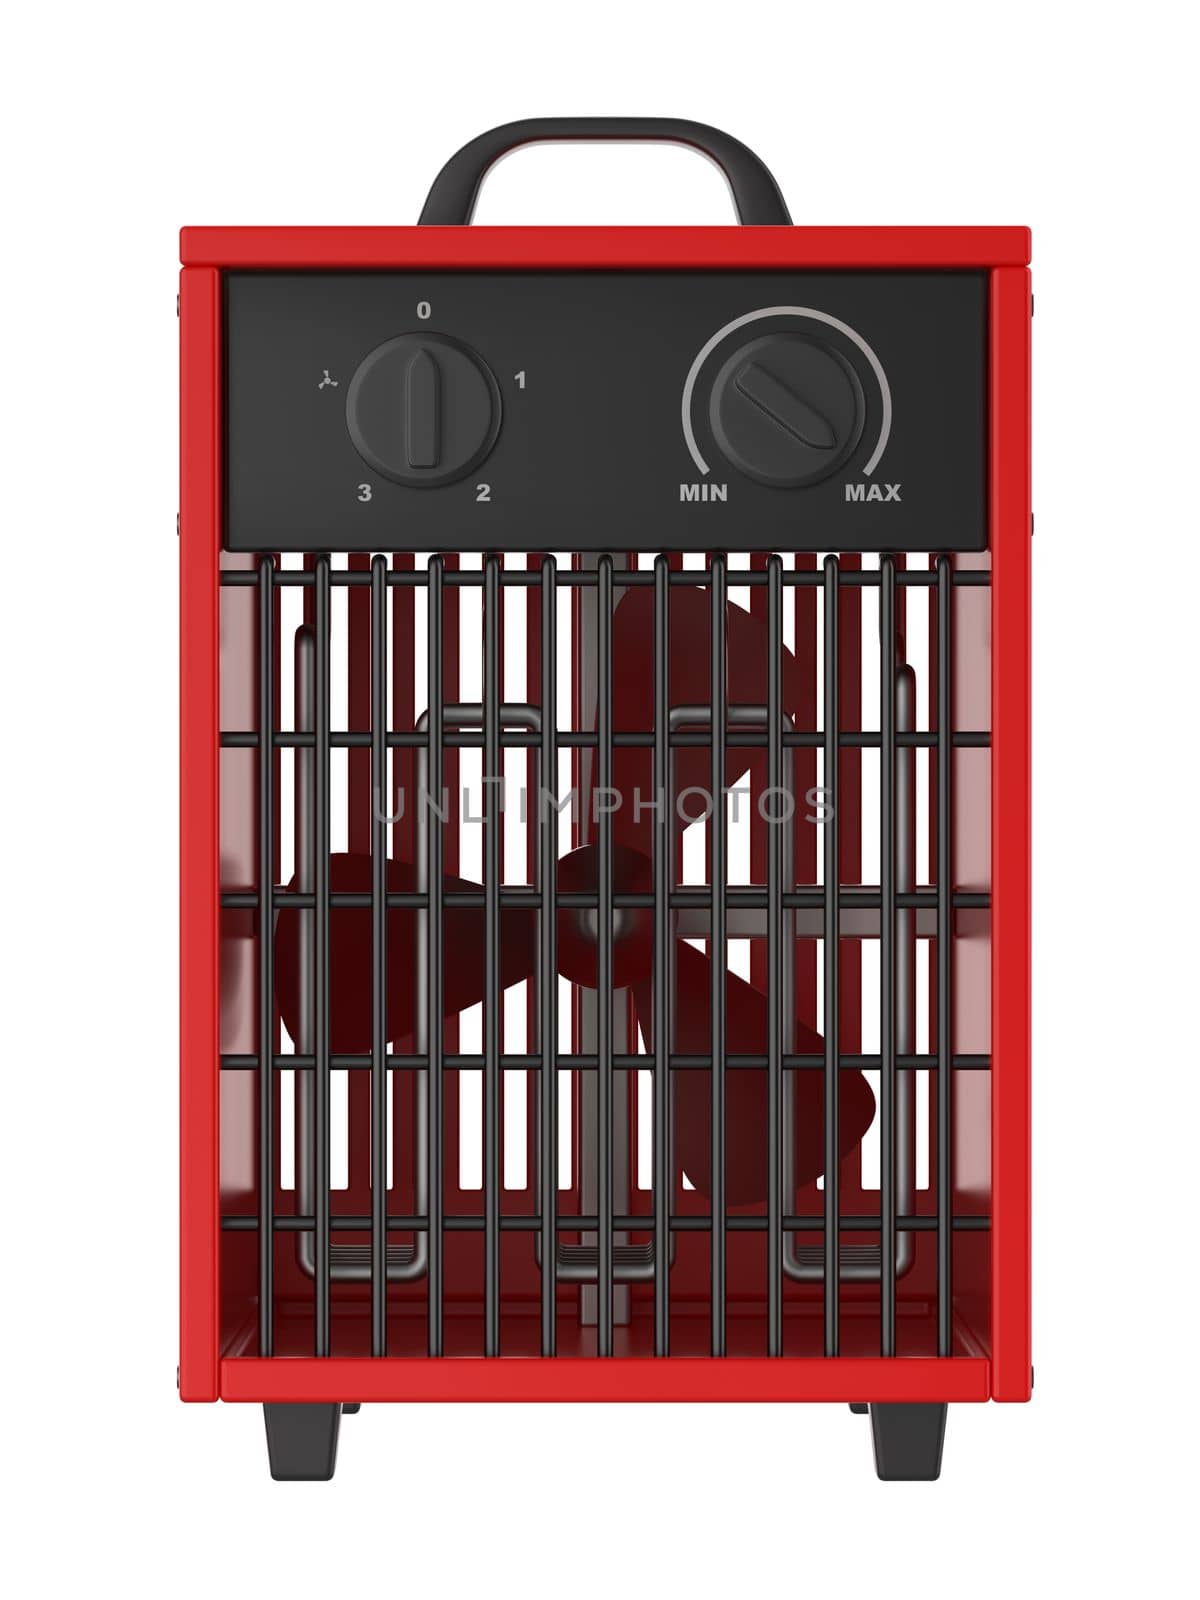 Red industrial fan heater by magraphics